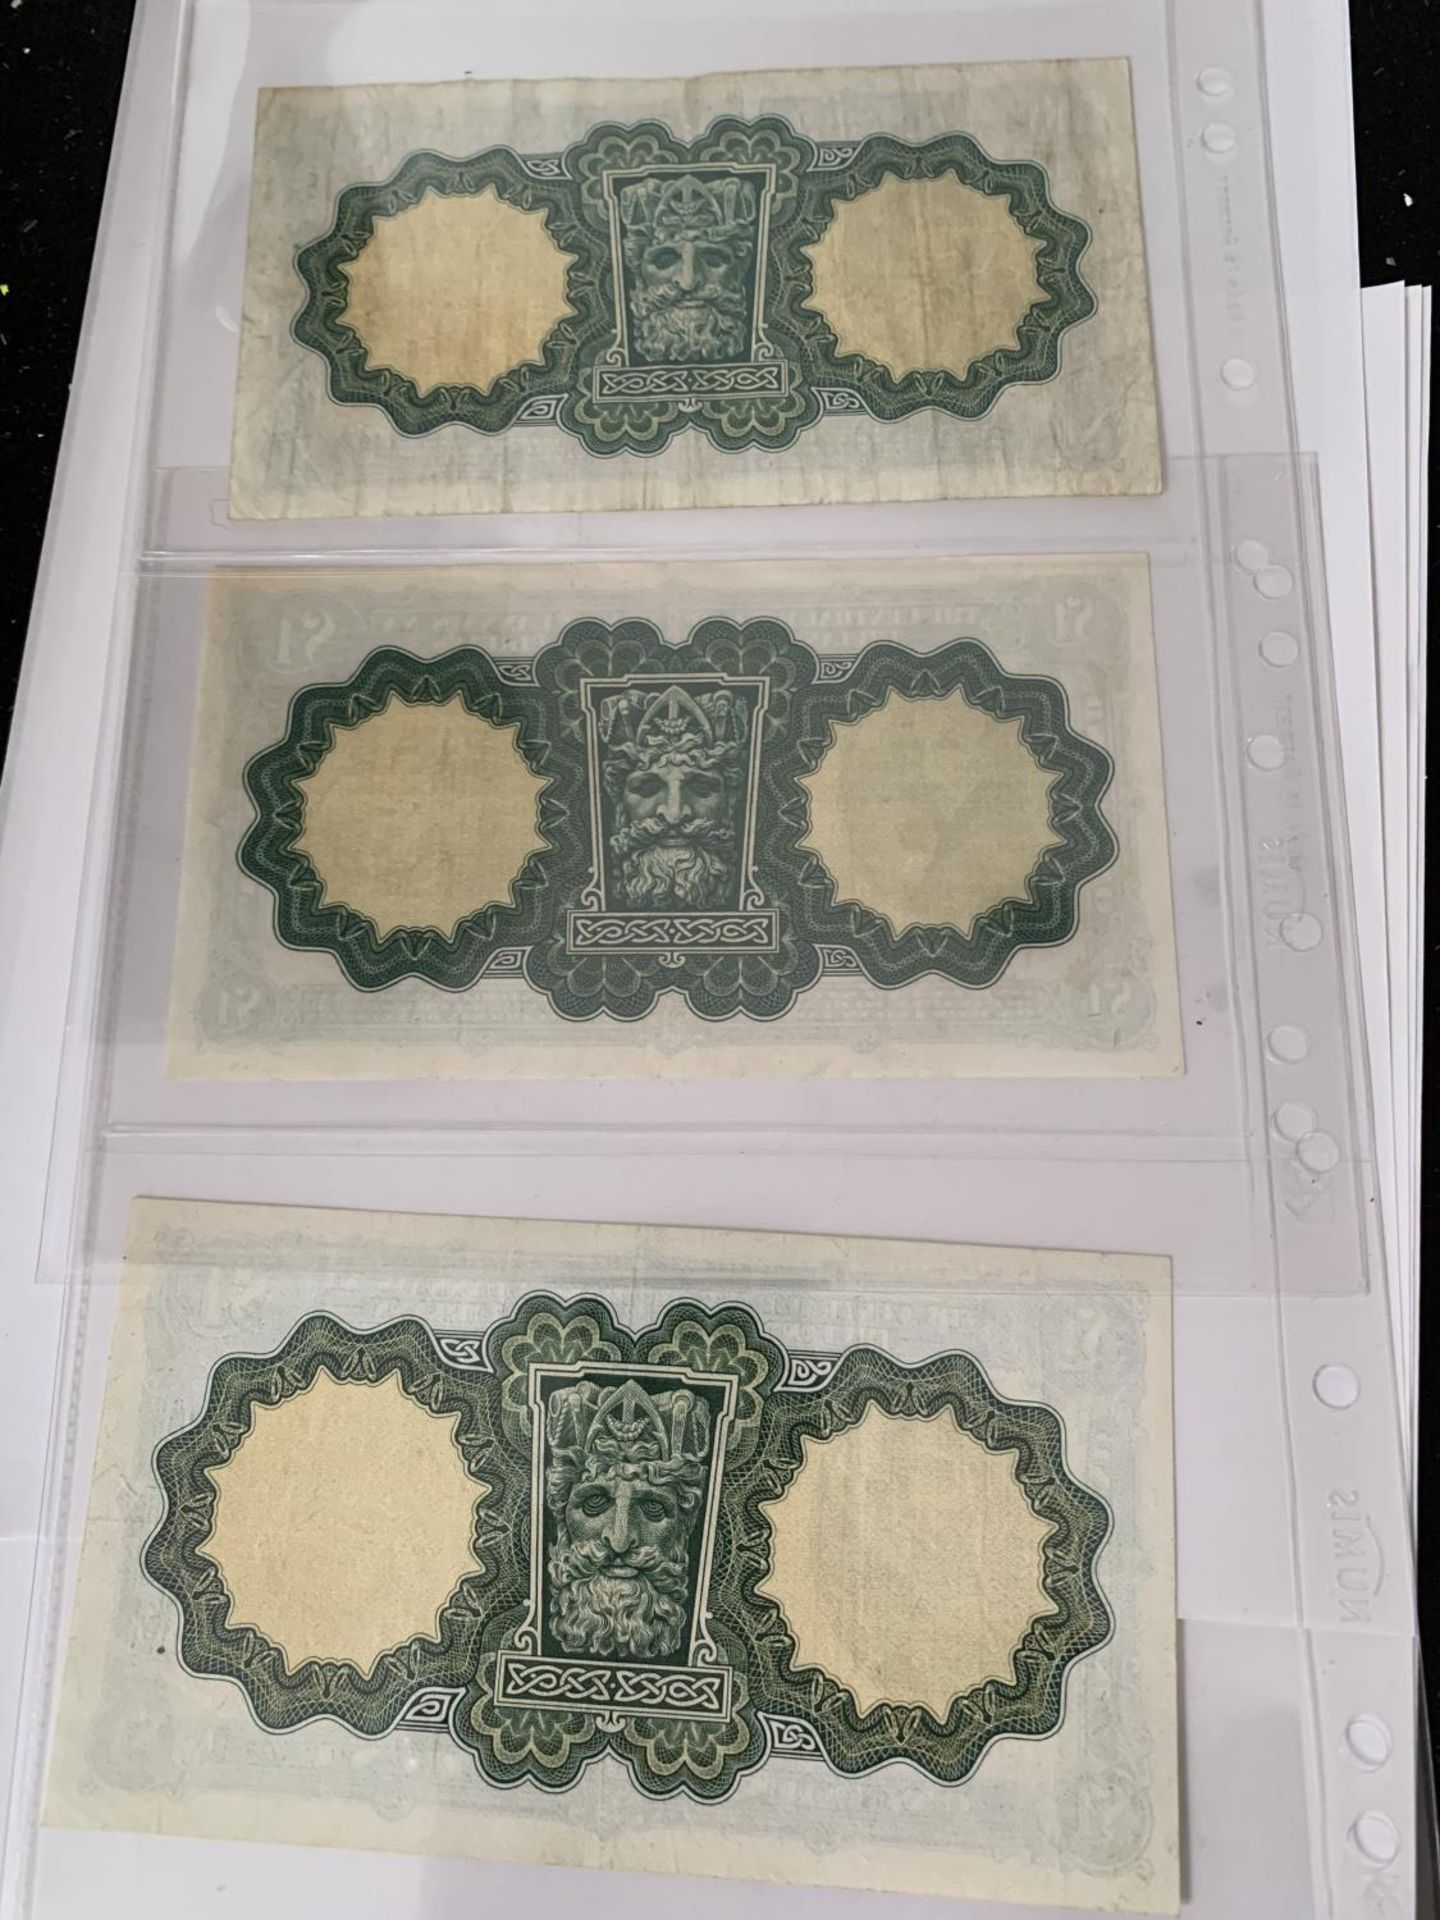 THREE OF THE CENTRAL BANK OF IRELAND ONE POUND NOTES - Image 5 of 5